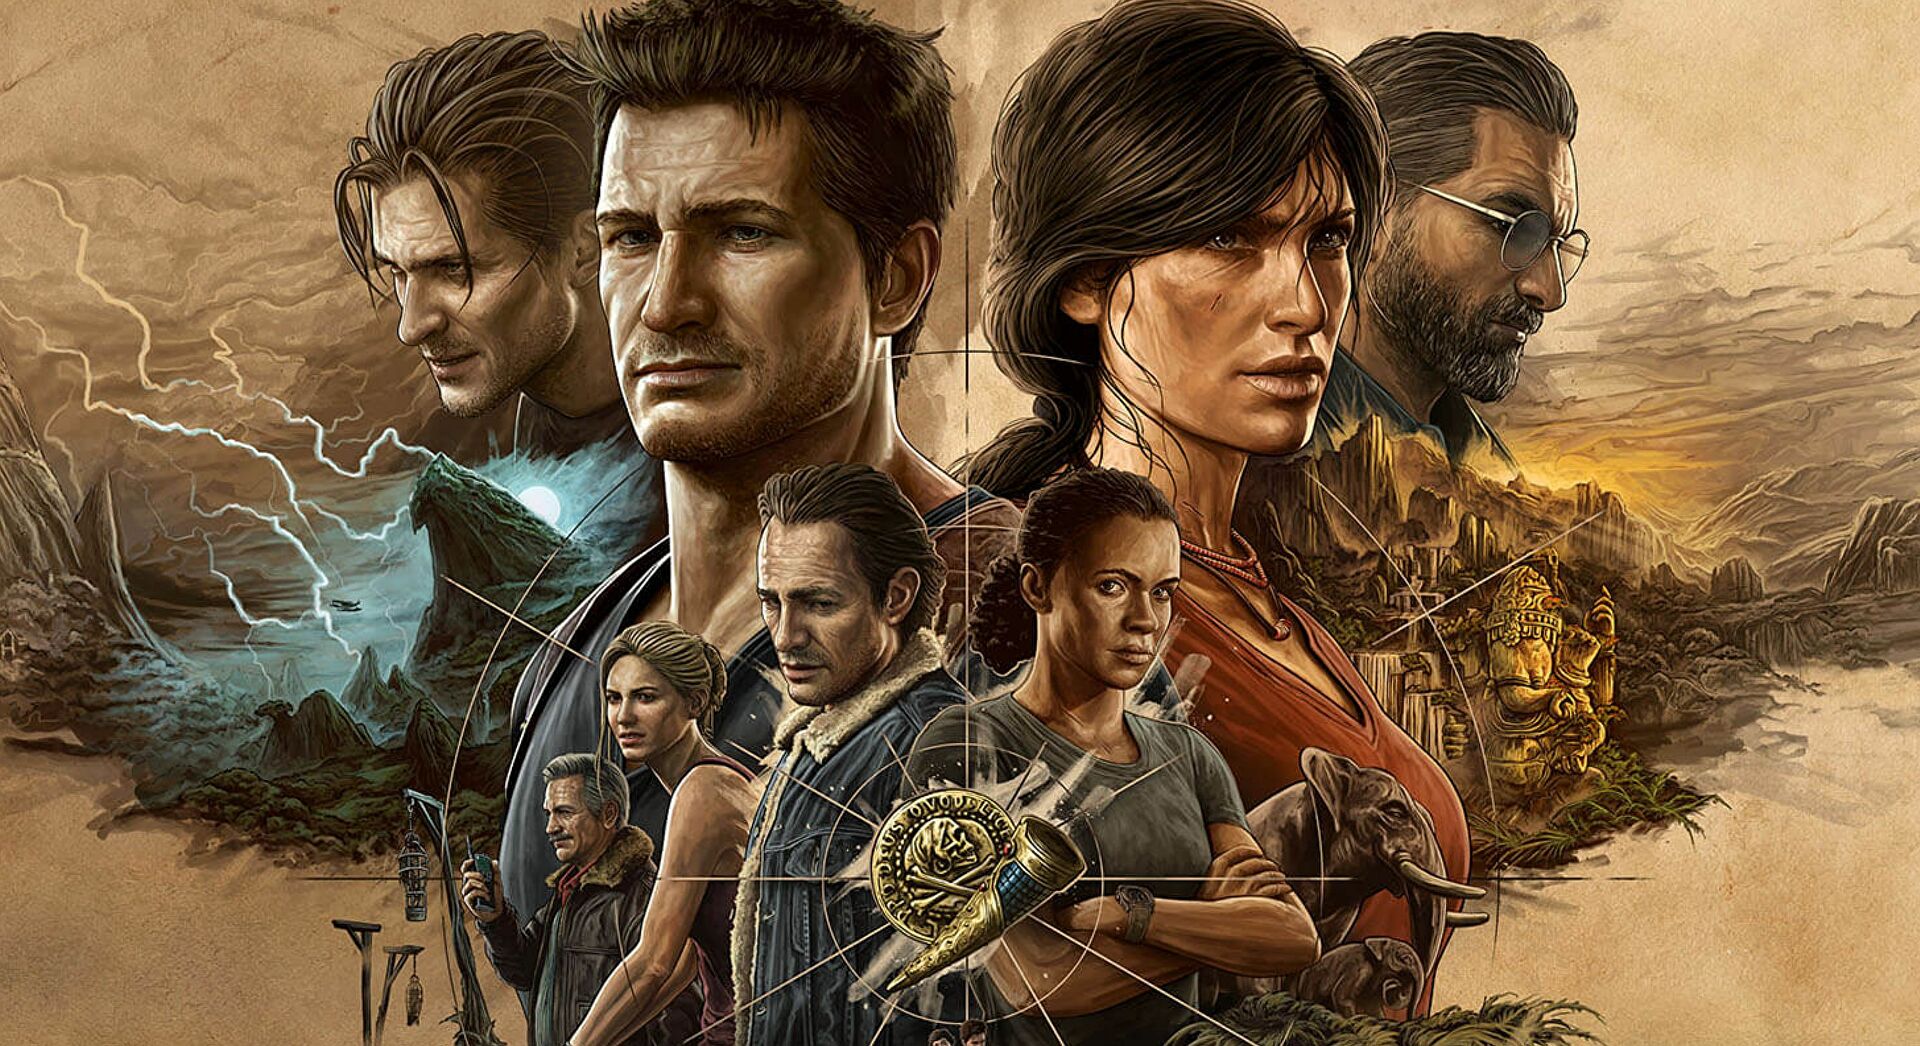 New San Diego-based PlayStation studio working with Naughty Dog on a “beloved franchise”